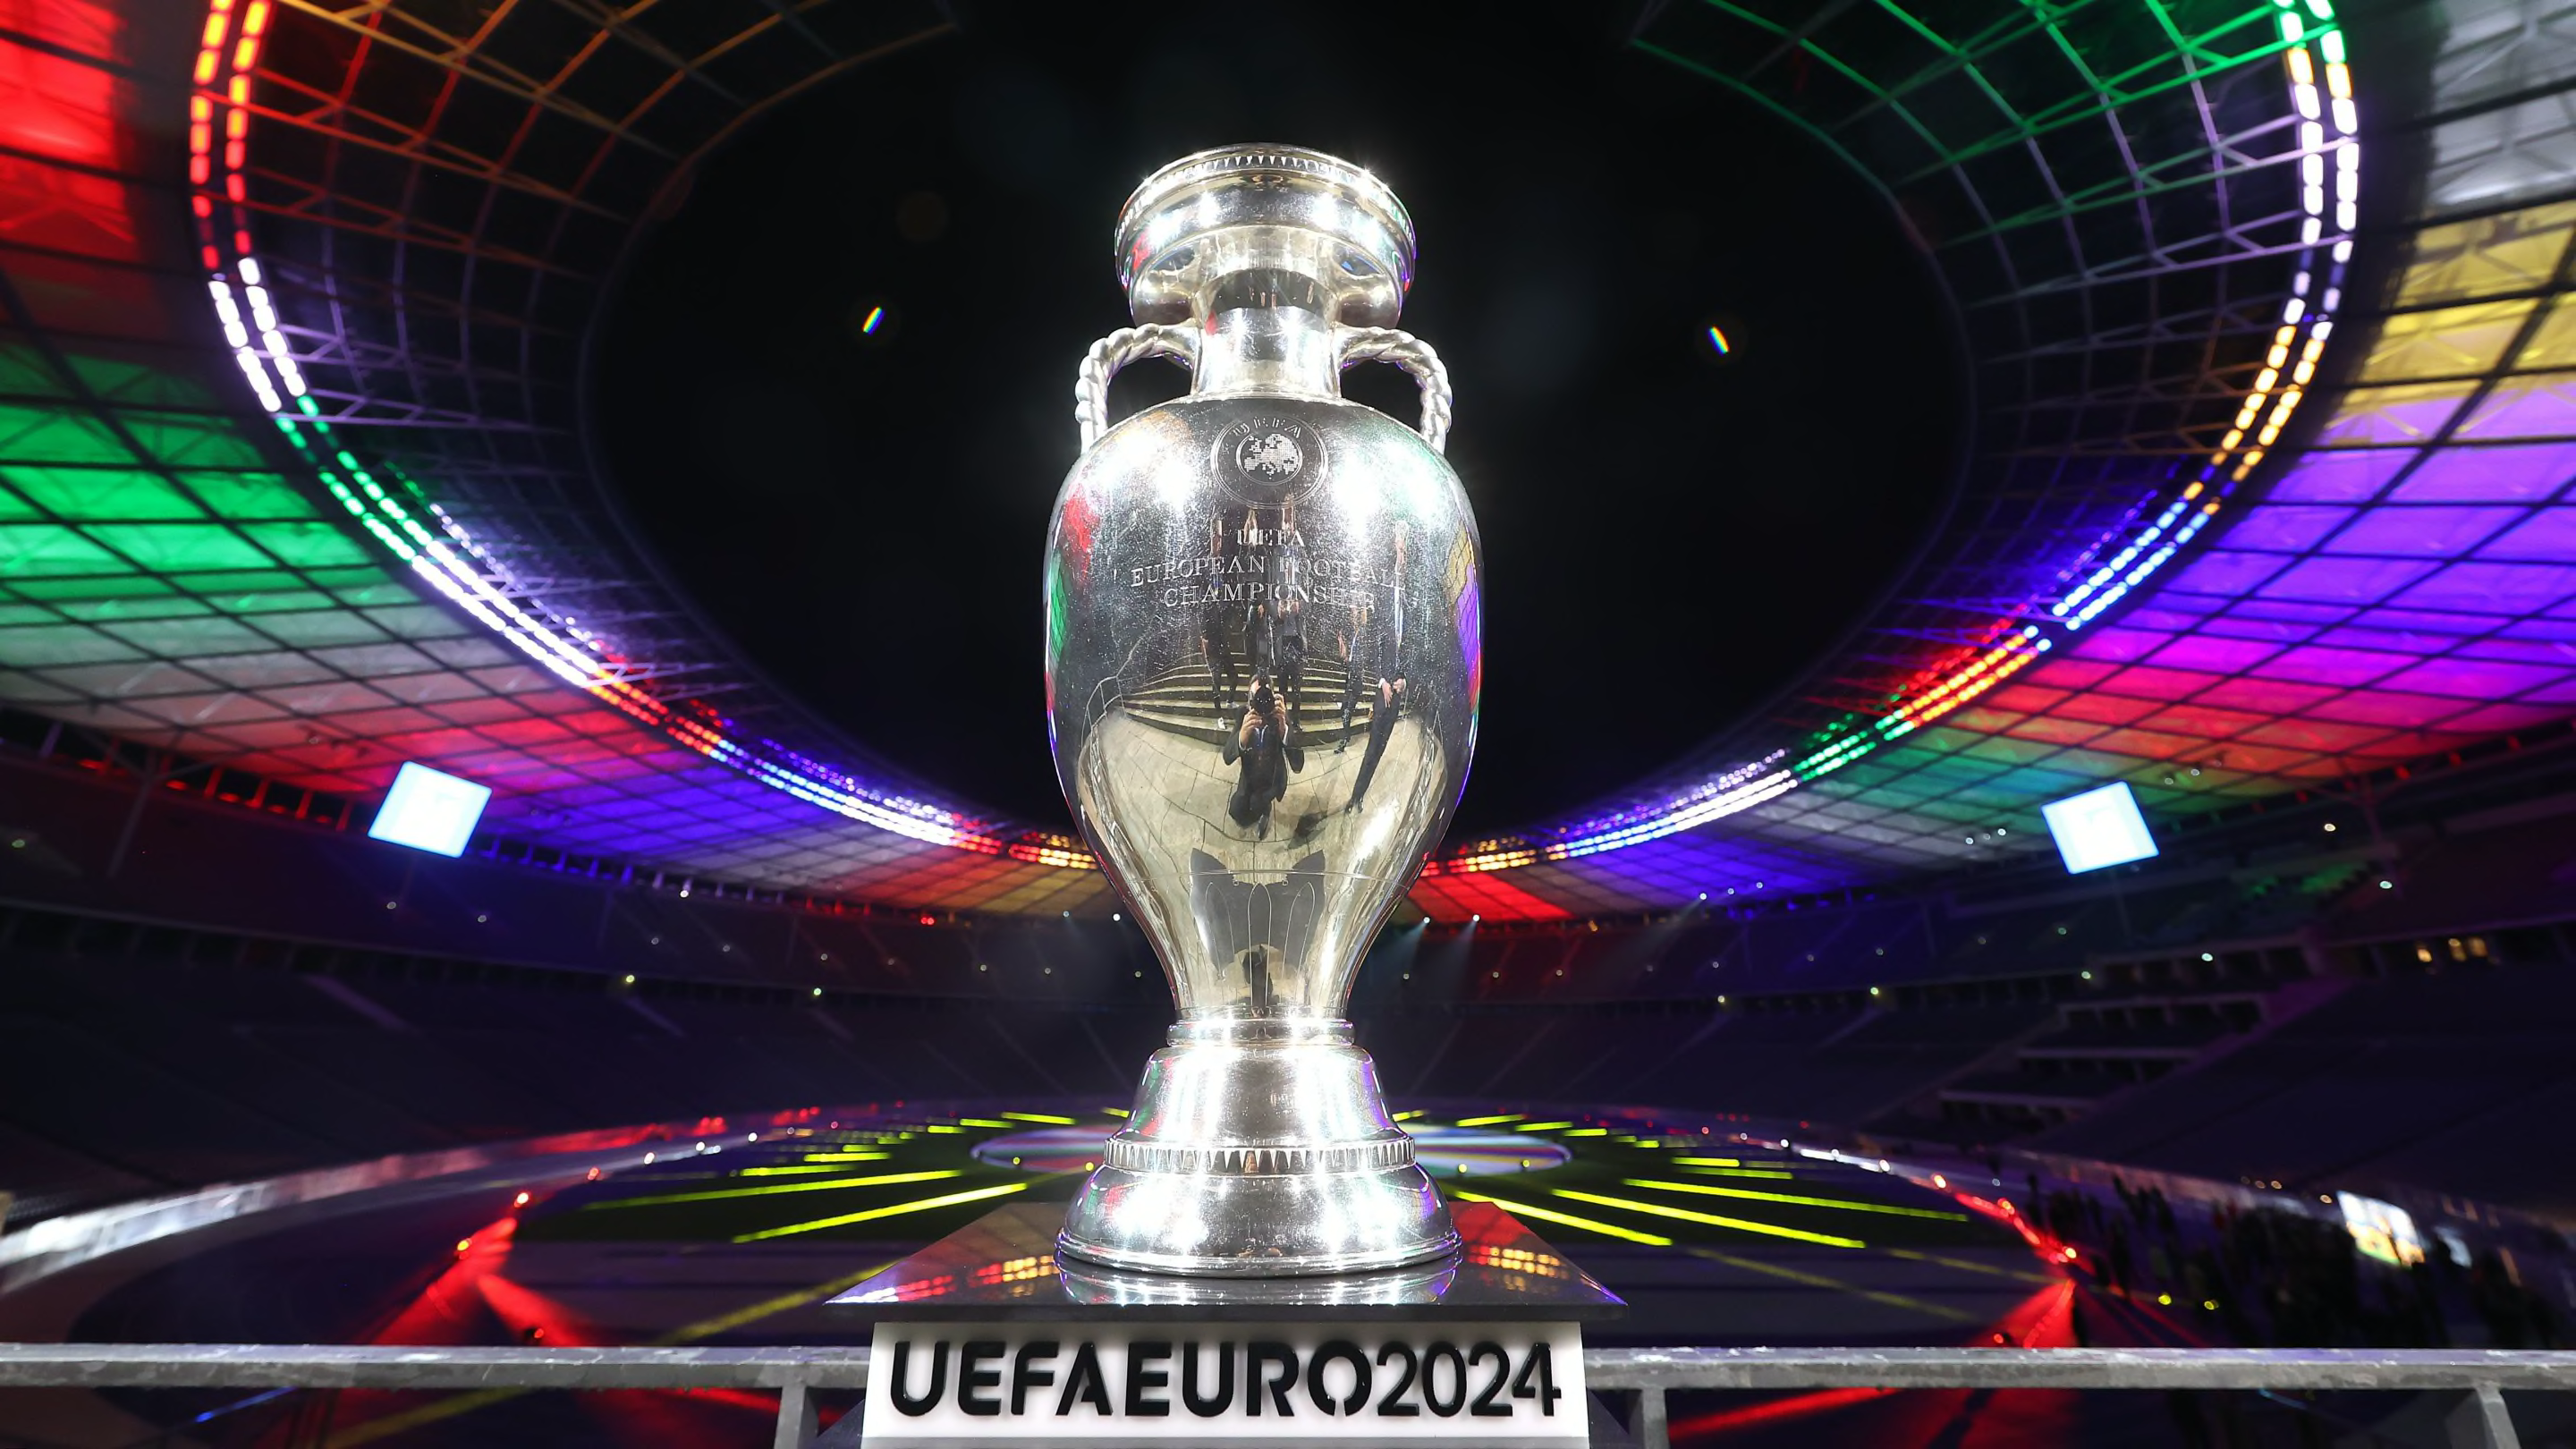 Where to watch Euro 2024 on TV